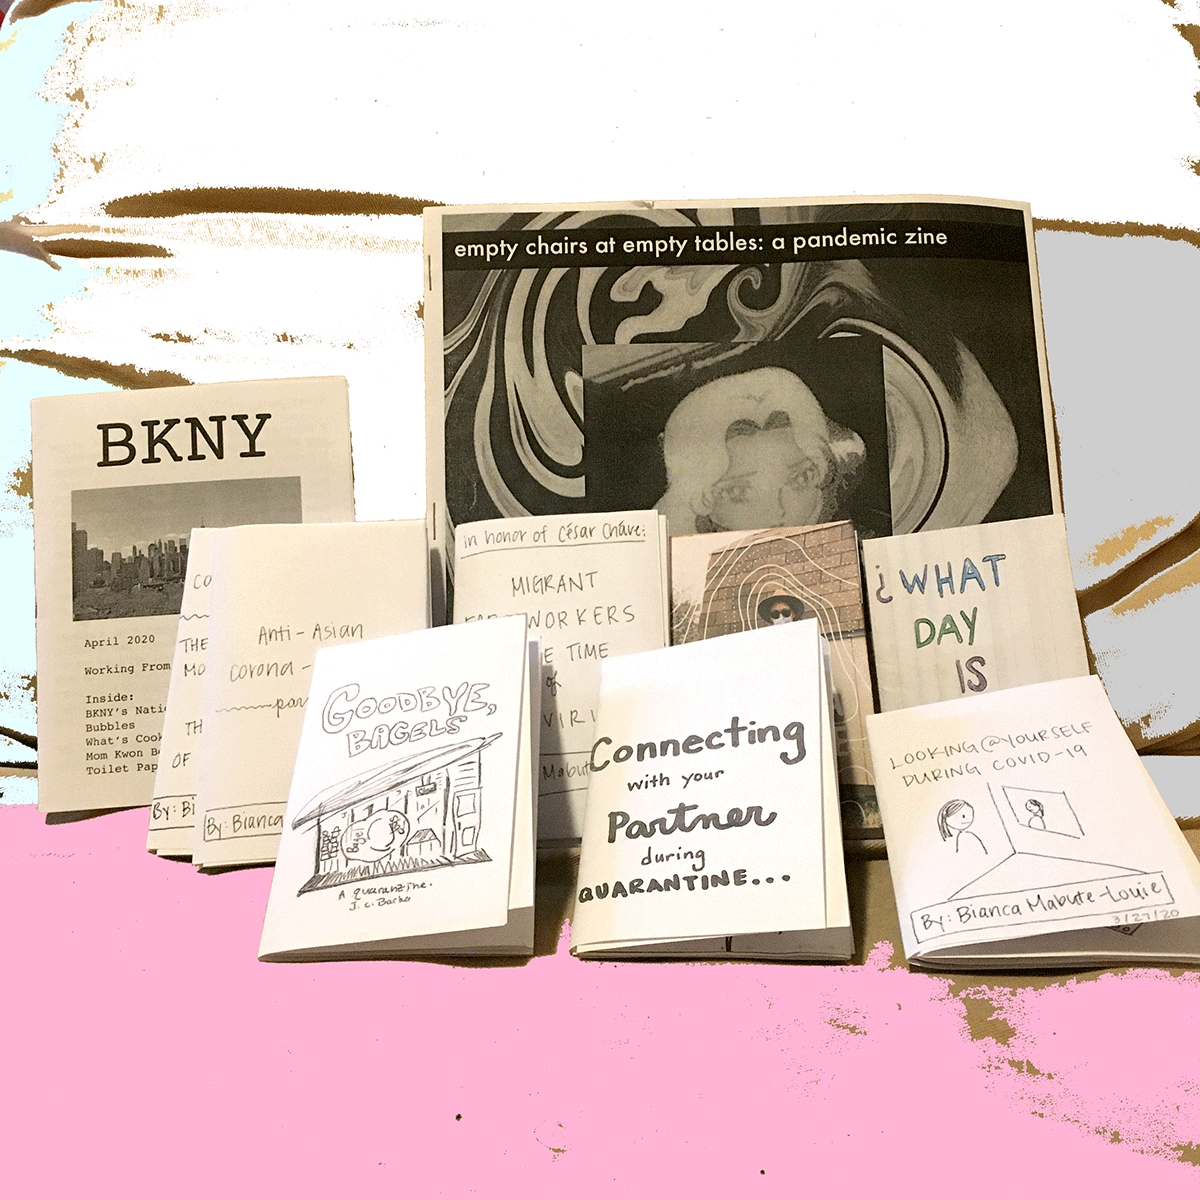 photo of zines added to the zine library on May 6, 2020